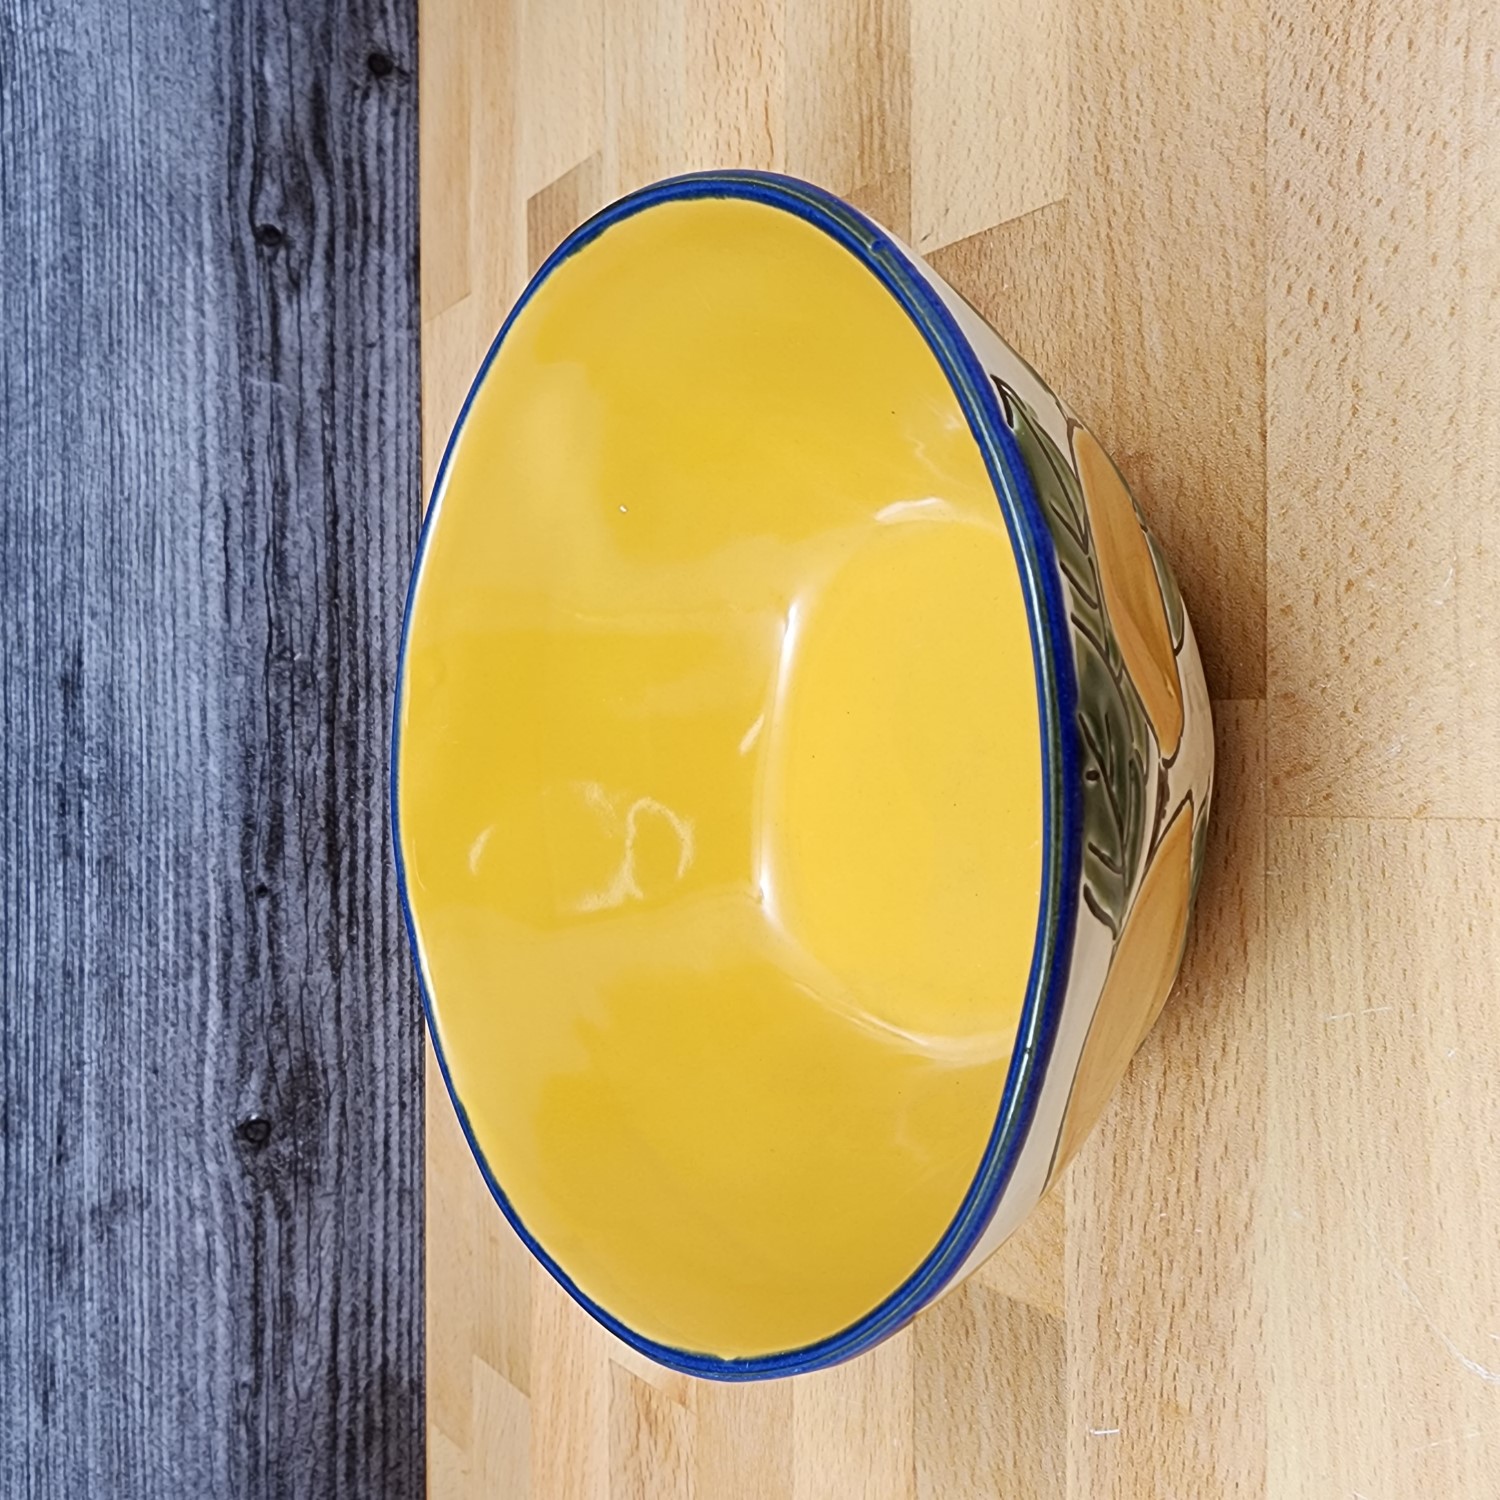 This Lemon Fruit Bowl Embossed Decorative Floral by Blue Sky 6.5 in (16cm) is made with love by Premier Homegoods! Shop more unique gift ideas today with Spots Initiatives, the best way to support creators.